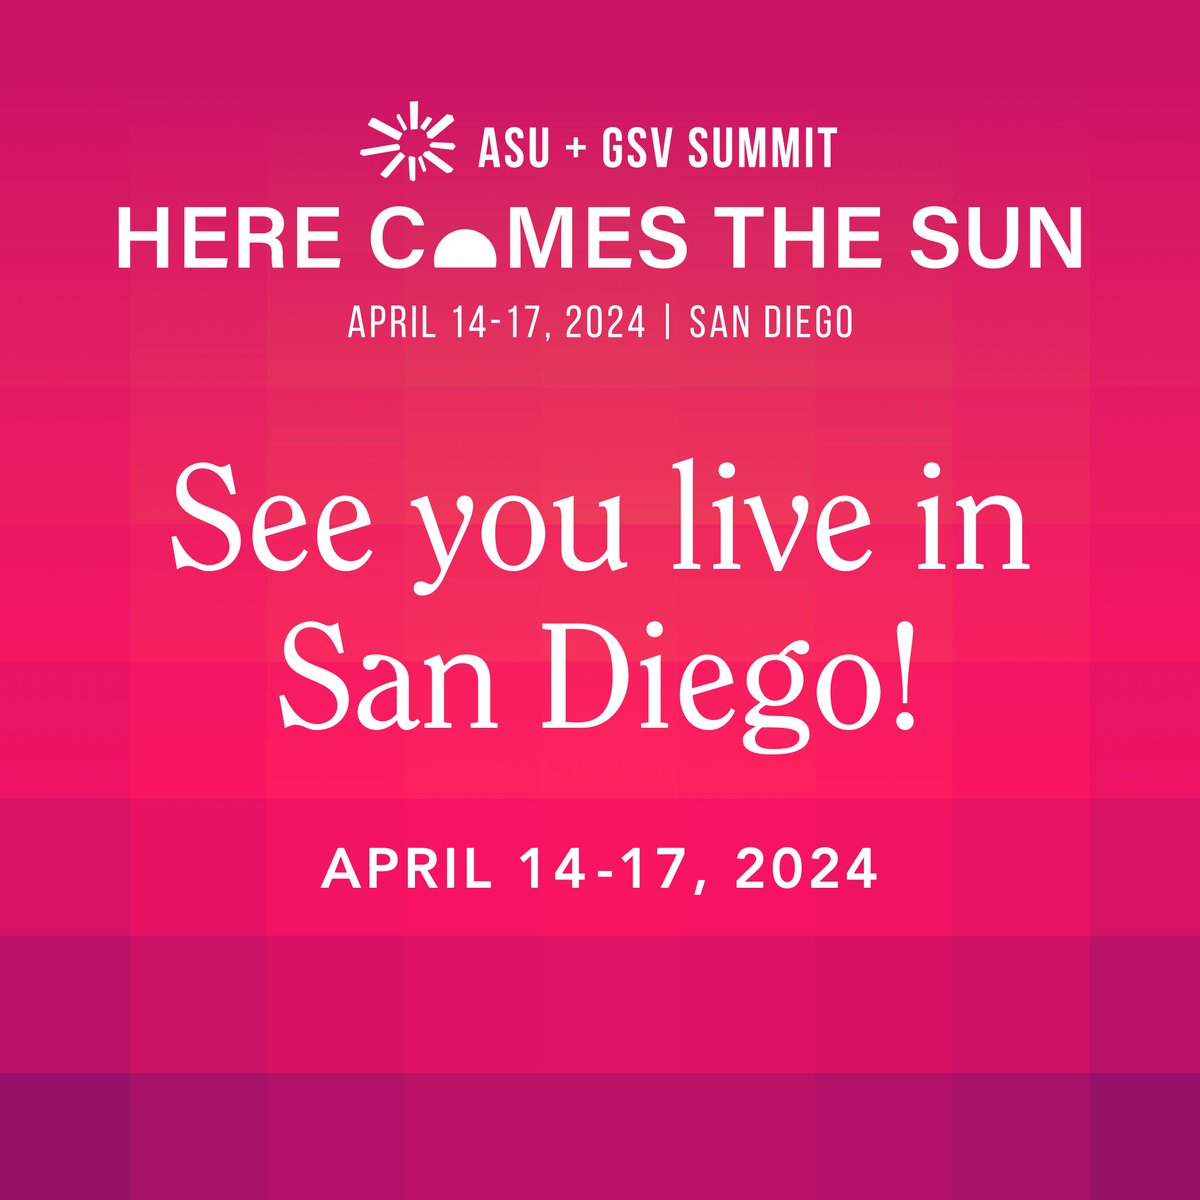 We're excited to be heading back to San Diego for the #asugsvsummit next month! Stay tuned for updates.